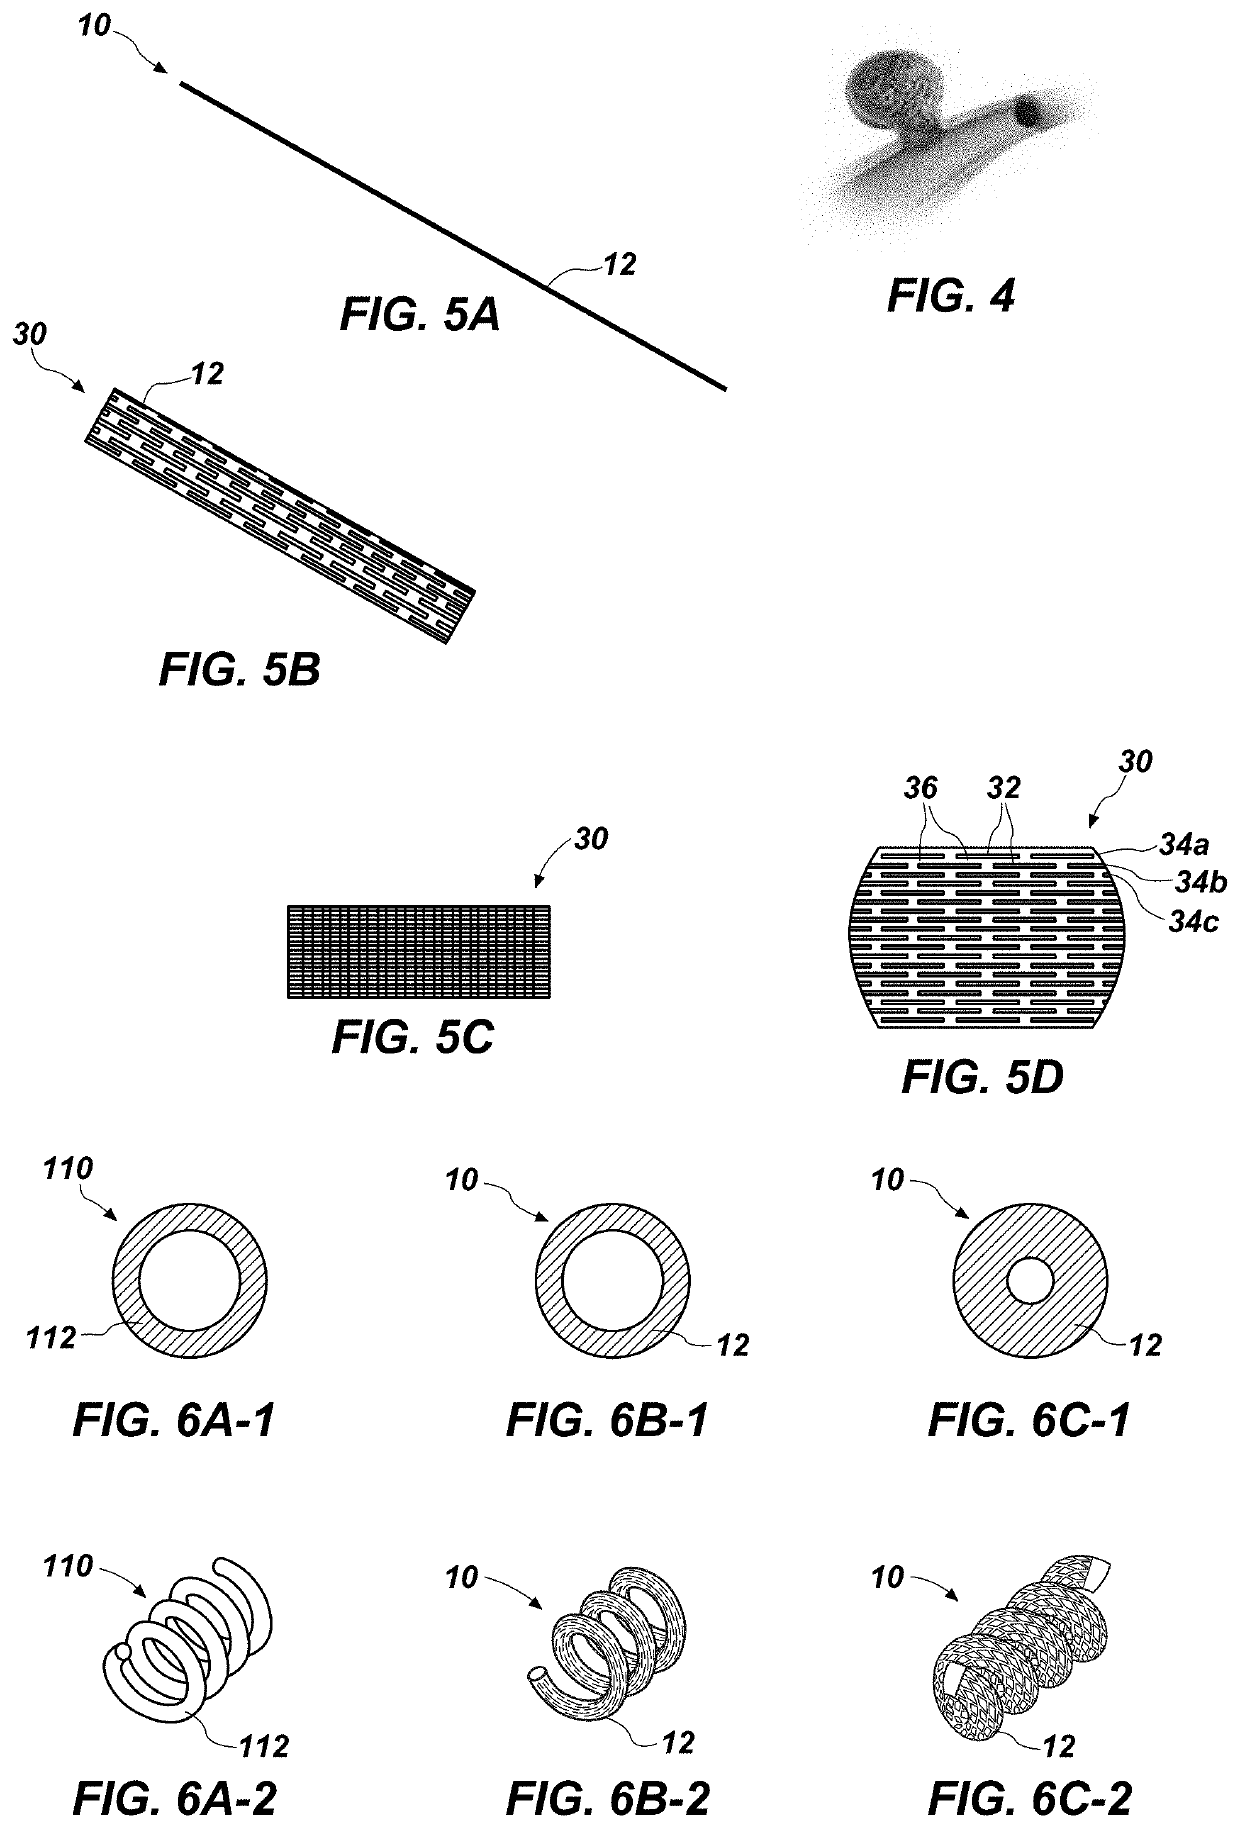 Occlusive device with self-expanding struts